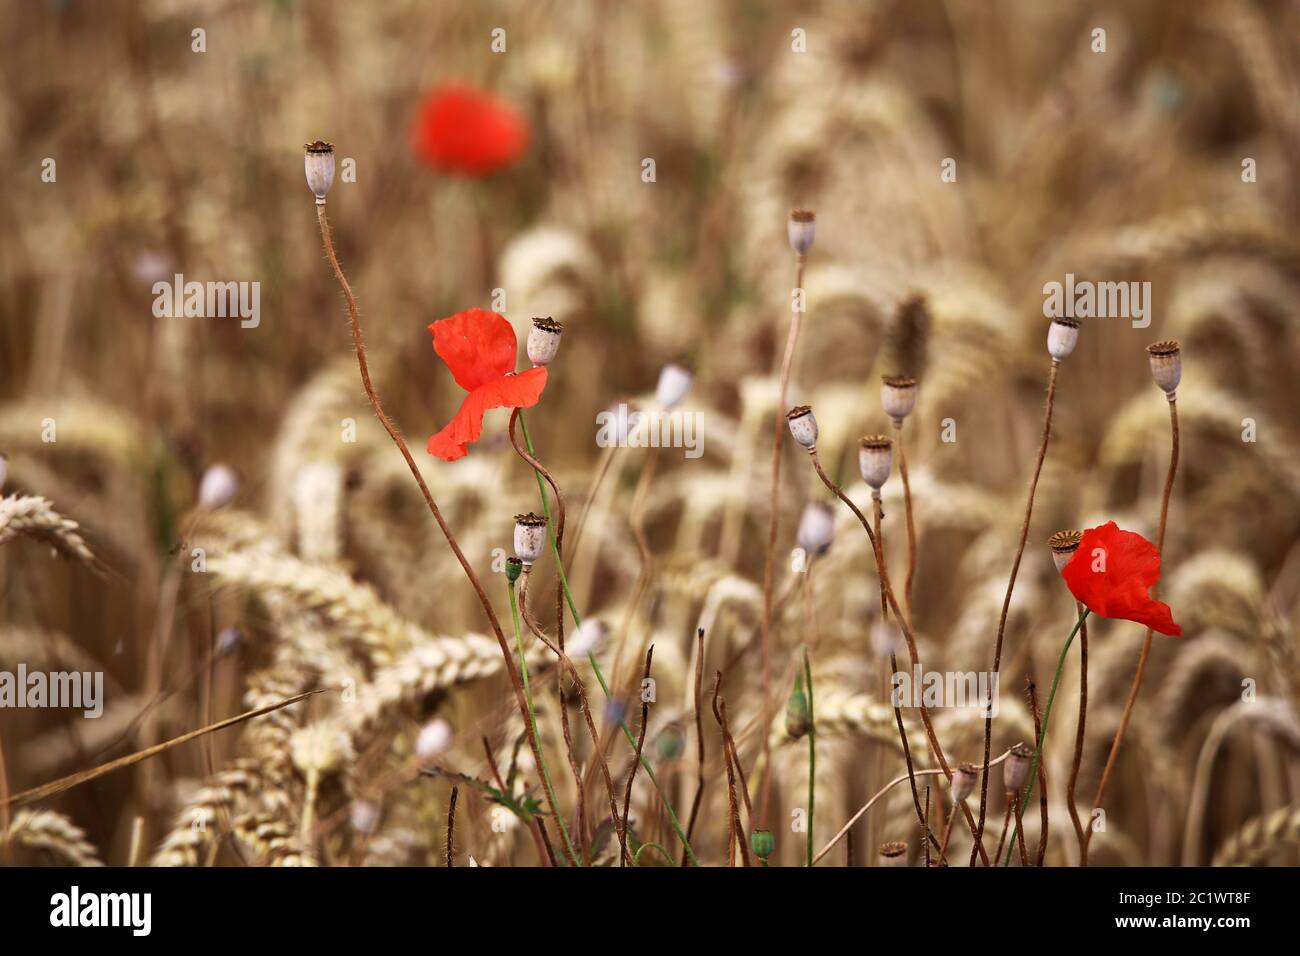 Three red poppy blossoms Papaver rhoeas in the cereal field Stock Photo